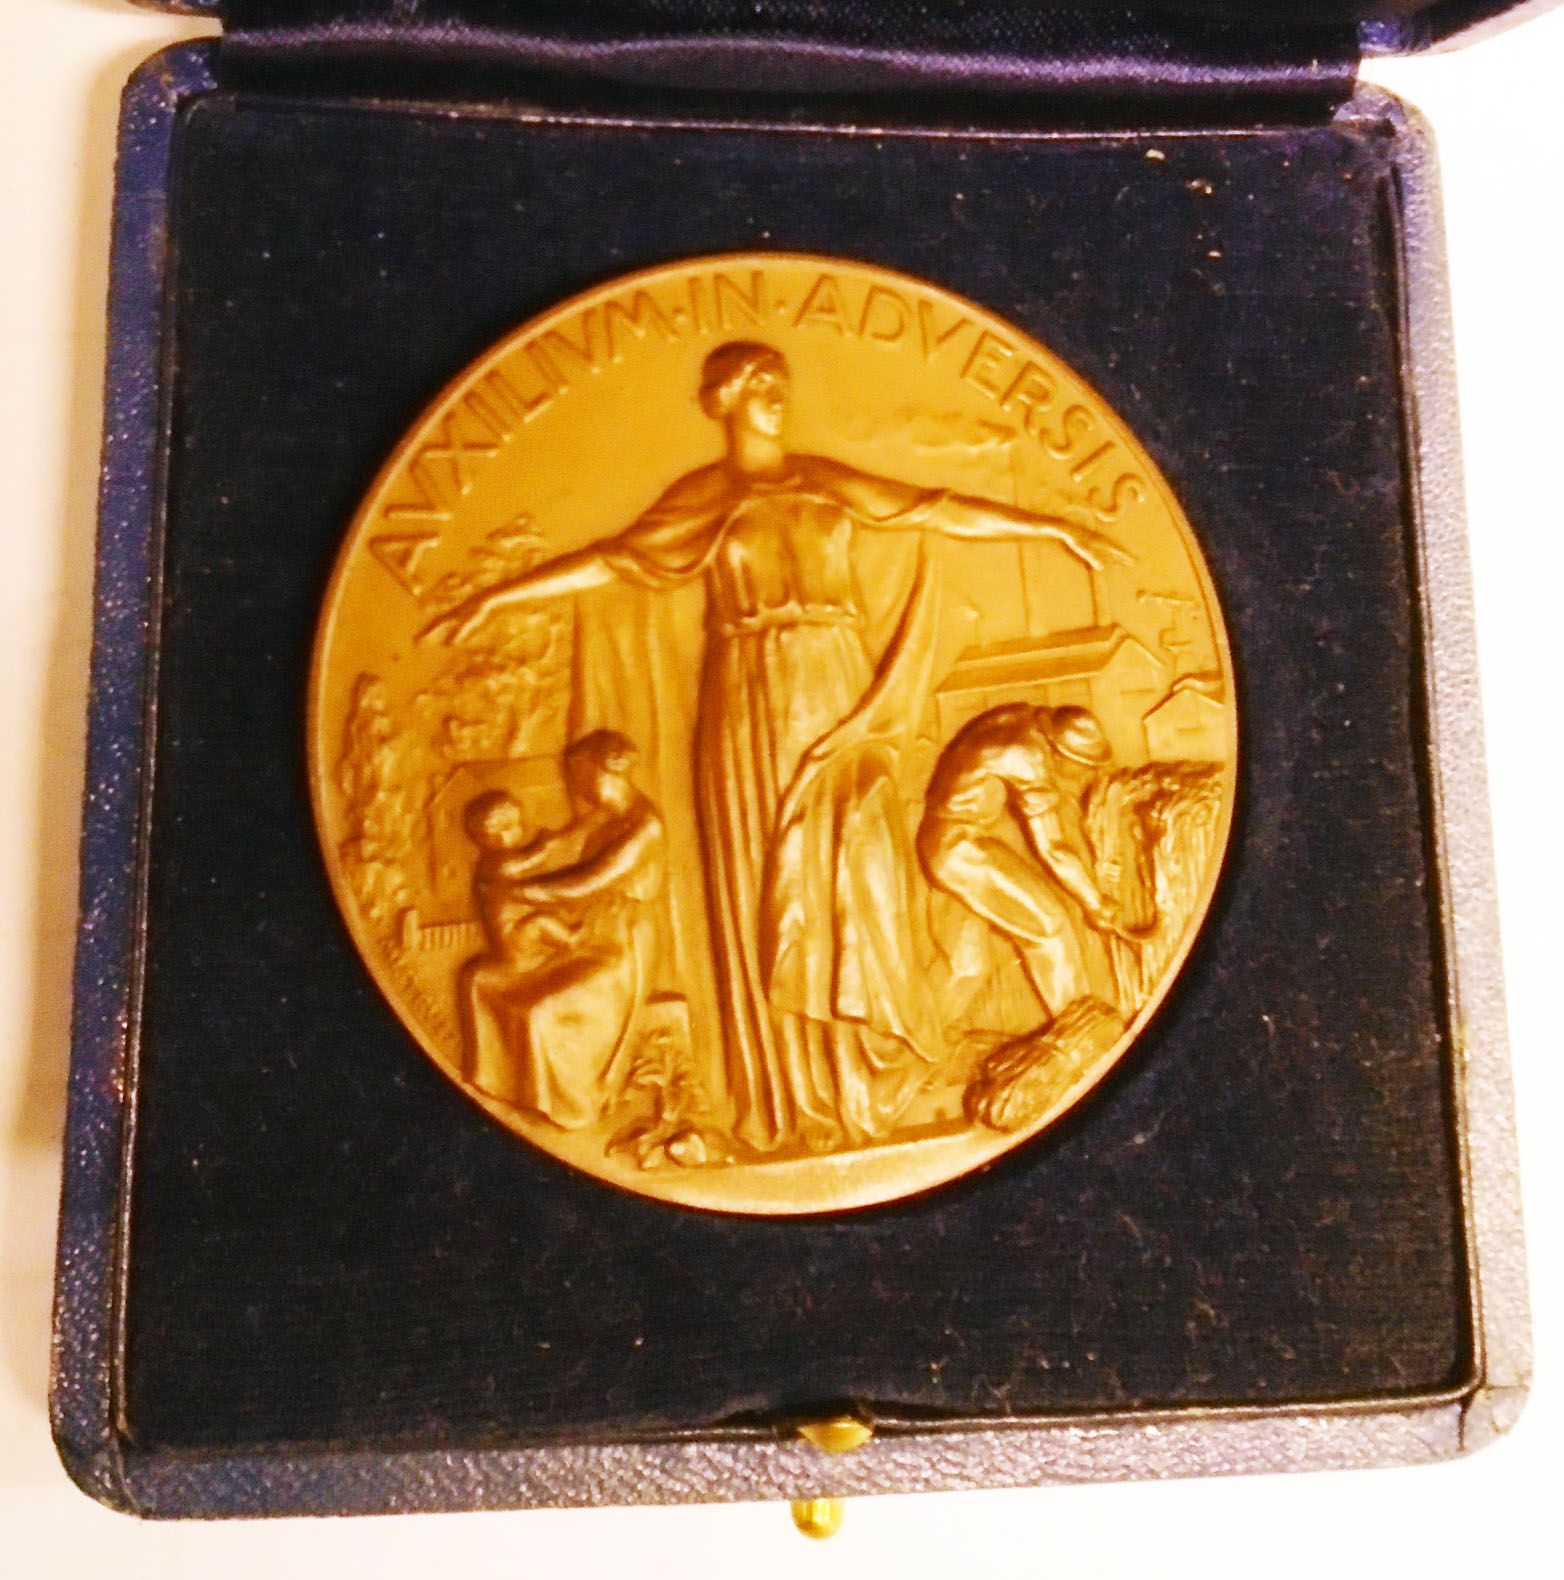 A 1938 cased bronze medallion commemorating the Centenary of the Adriatic Meeting for the Safety